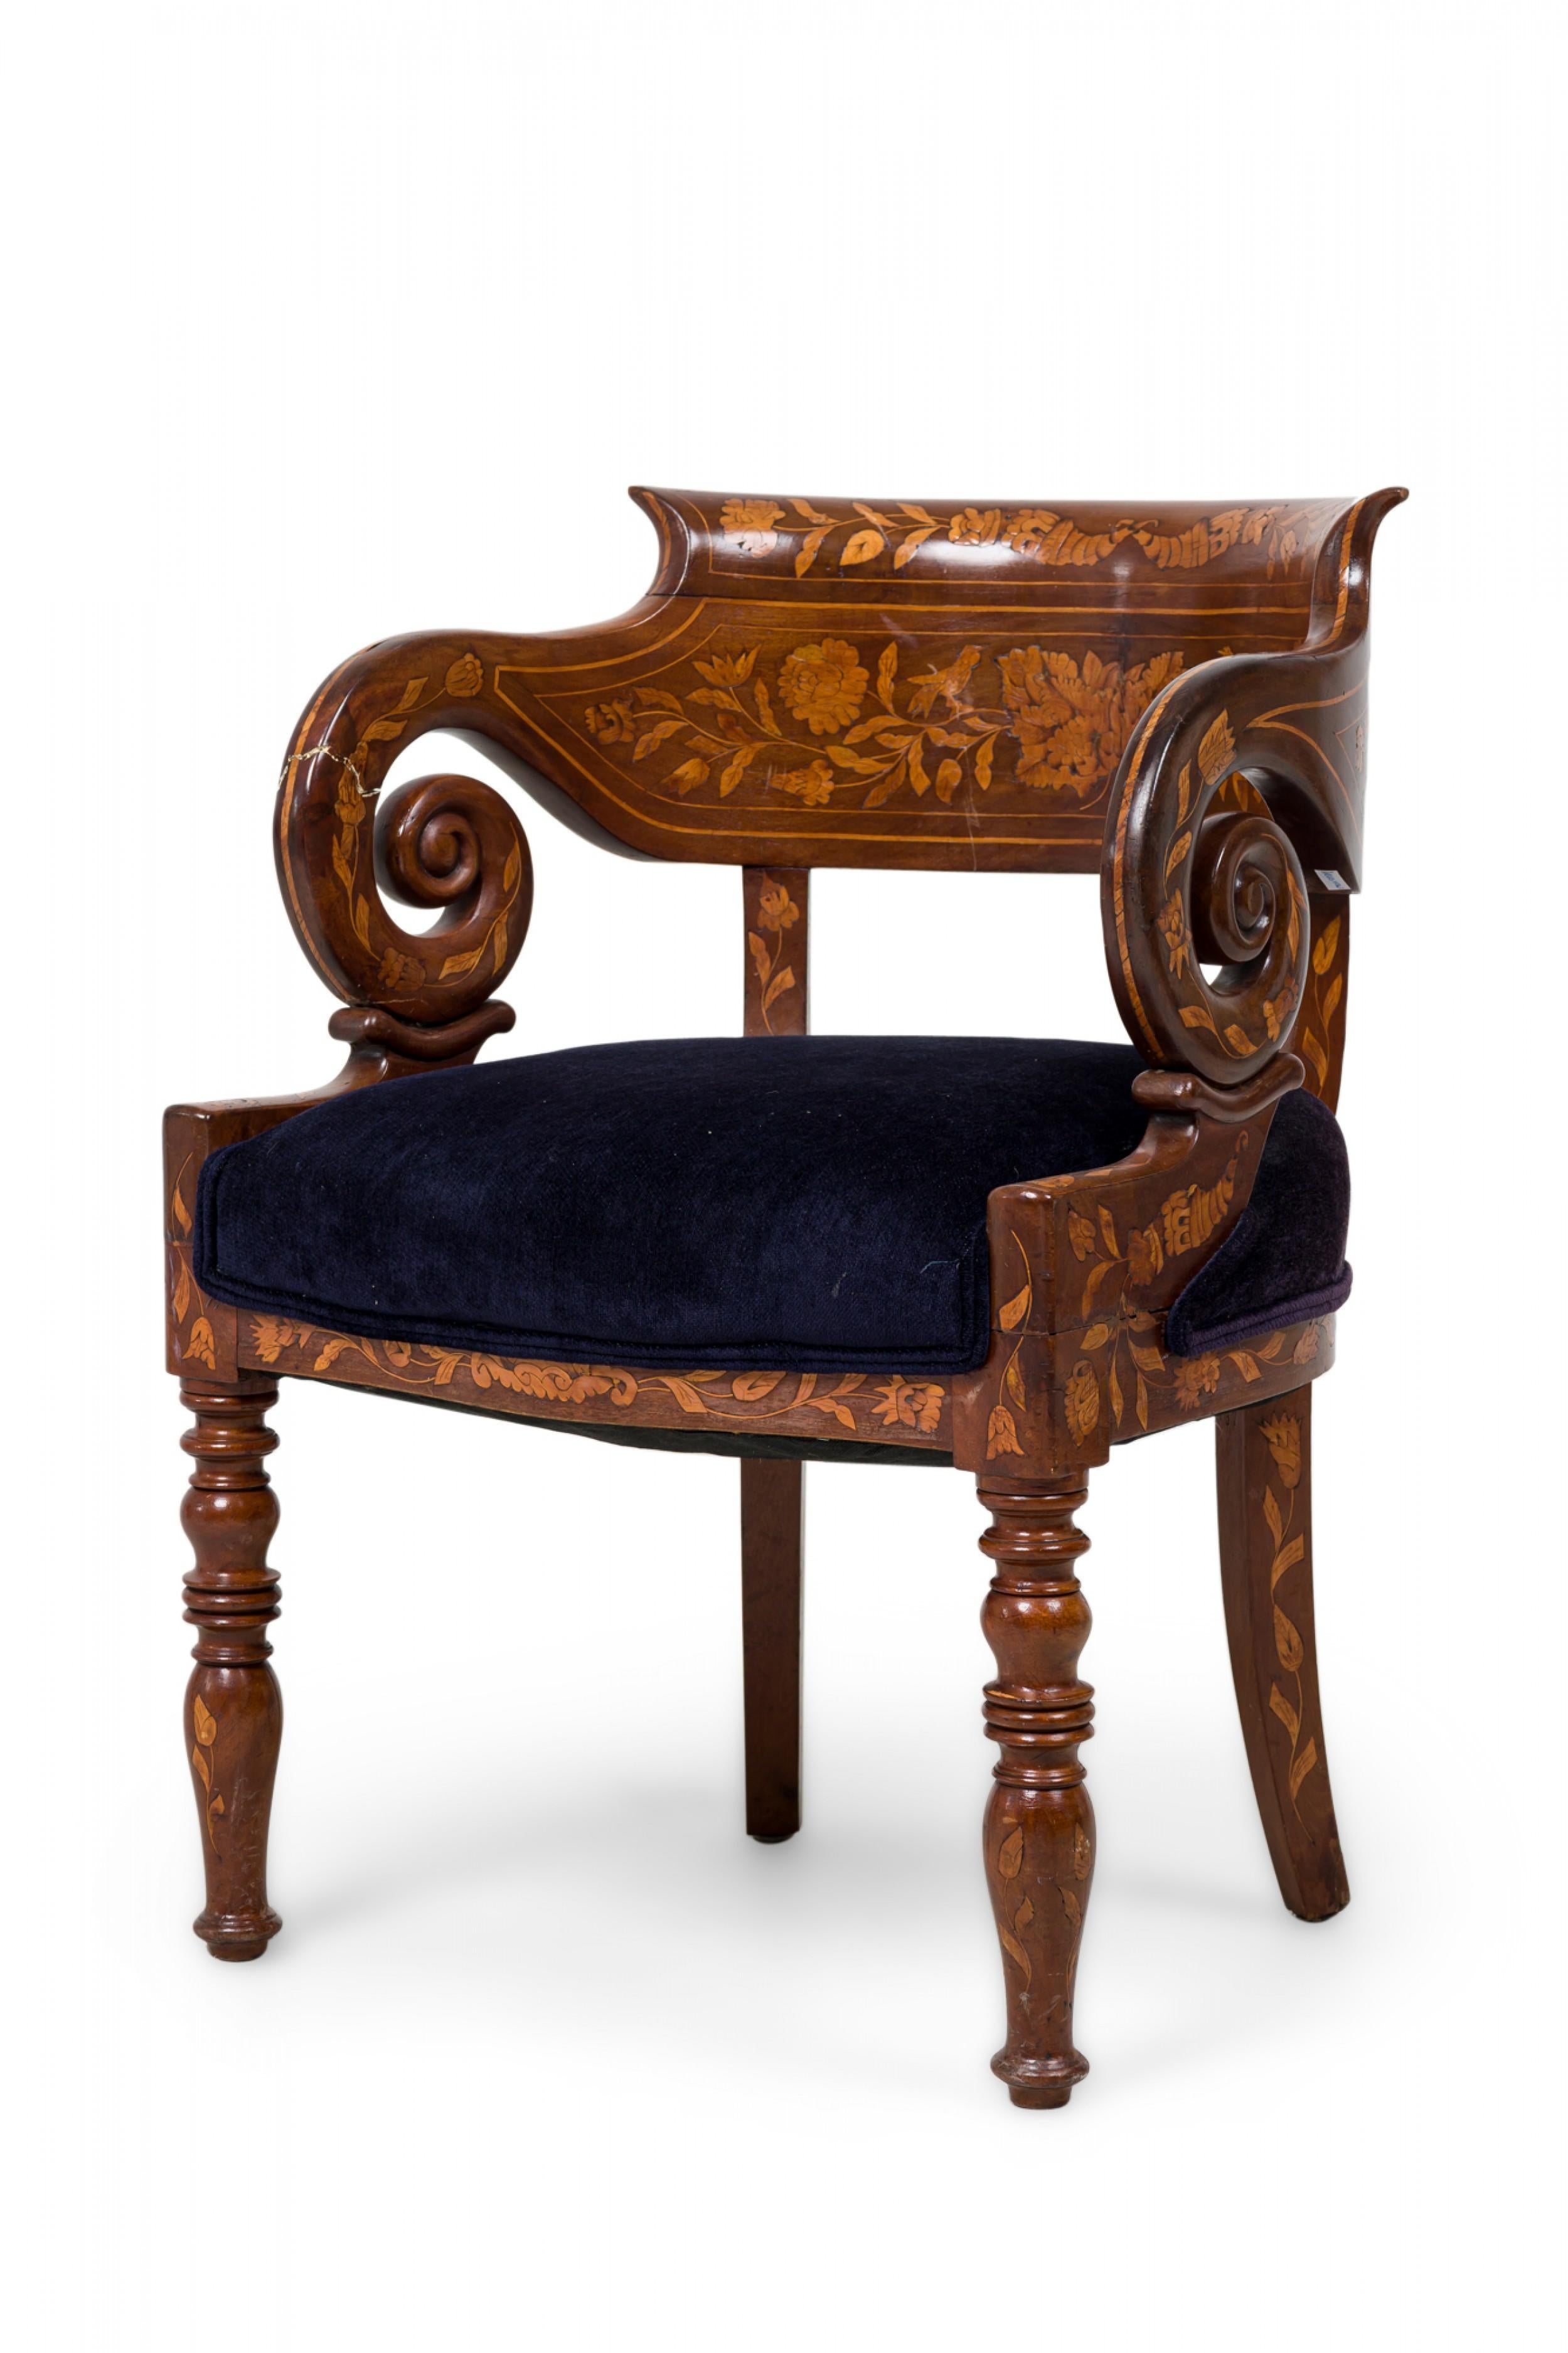 Dutch Neo-Classic Style (19th Century) desk chair / armchair with an upturned horseshoe back unified in the design with the scroll form arms, inlaid with abundant floral marquetry, with an upholstered seat in dark blue velour fabric, standing on 2